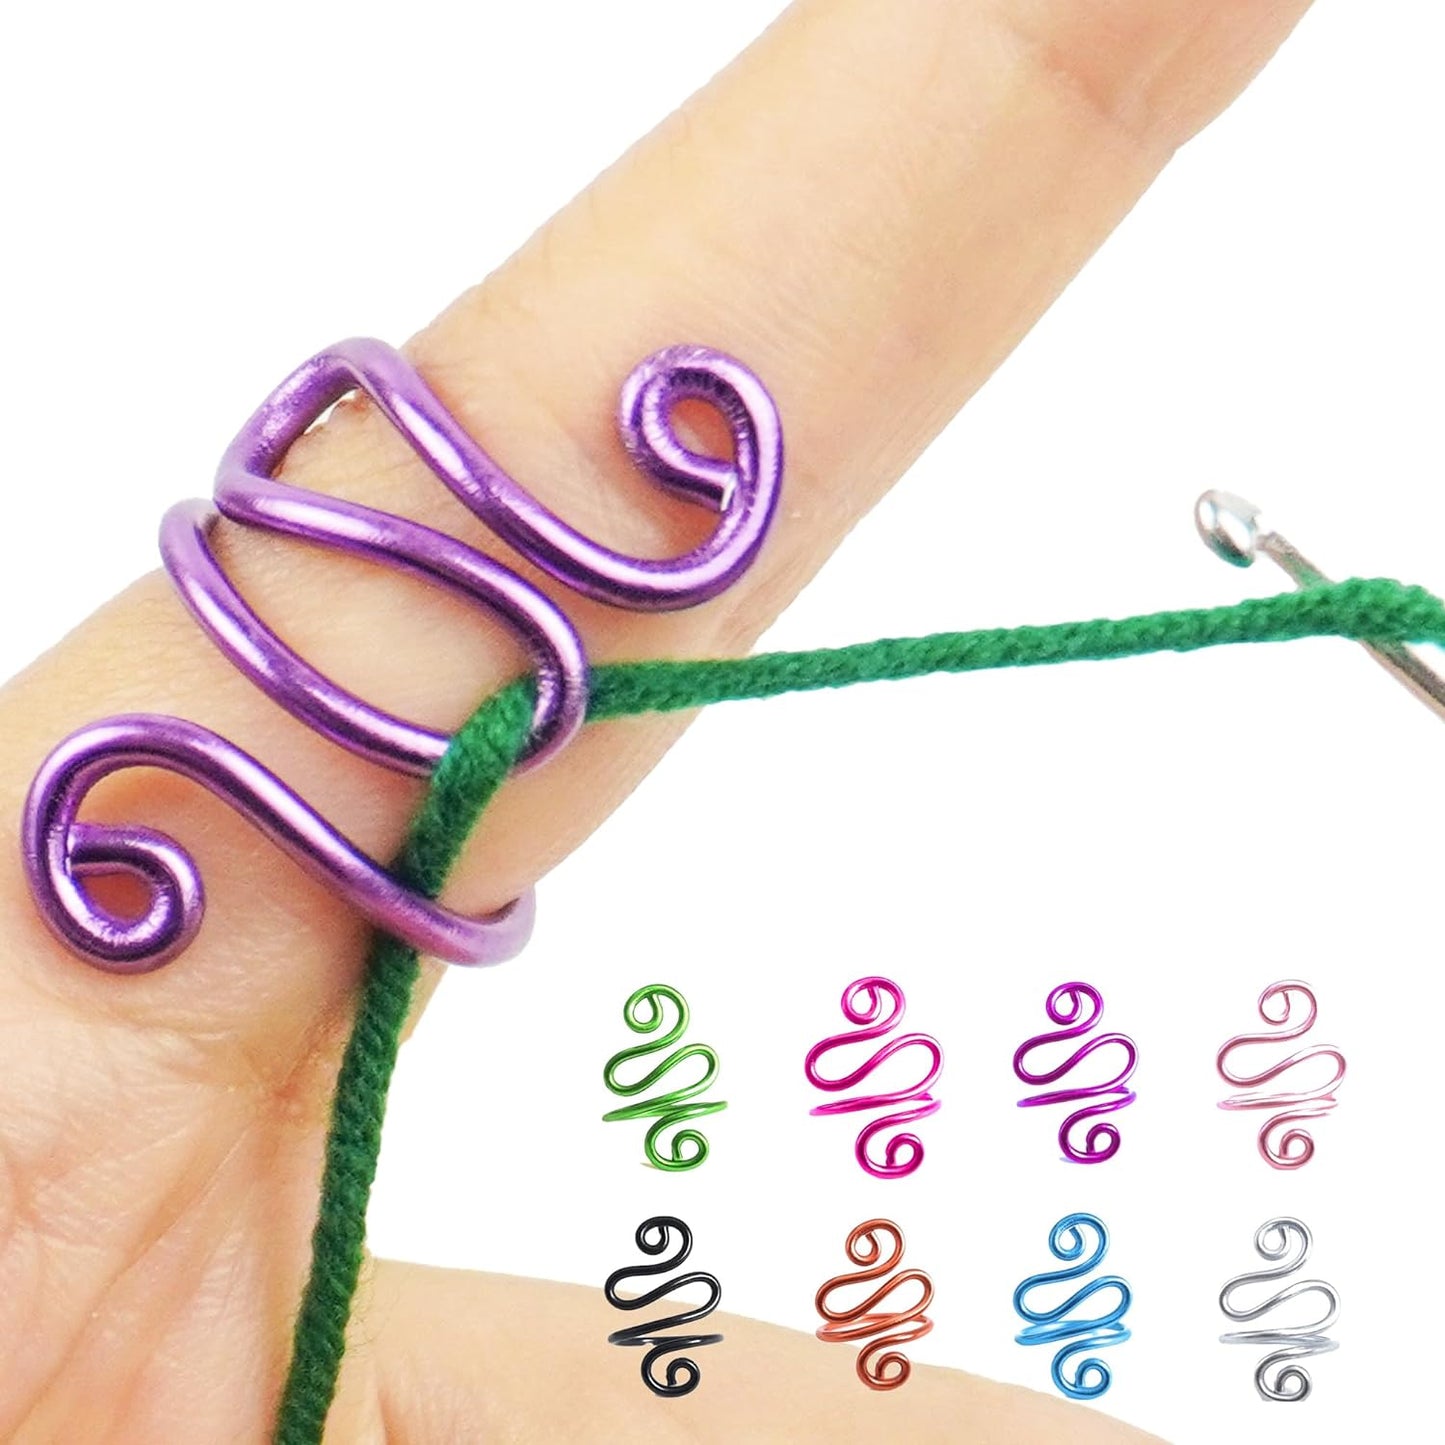 Handmade Crochet Tension Ring, Lefties & Righties Yarn Tension Control Ring, Adjustable Companion Ring, Gift for Crocheters Knitters, Mom, Valentines Day Gifts For Her (Size 7-10, Purple)